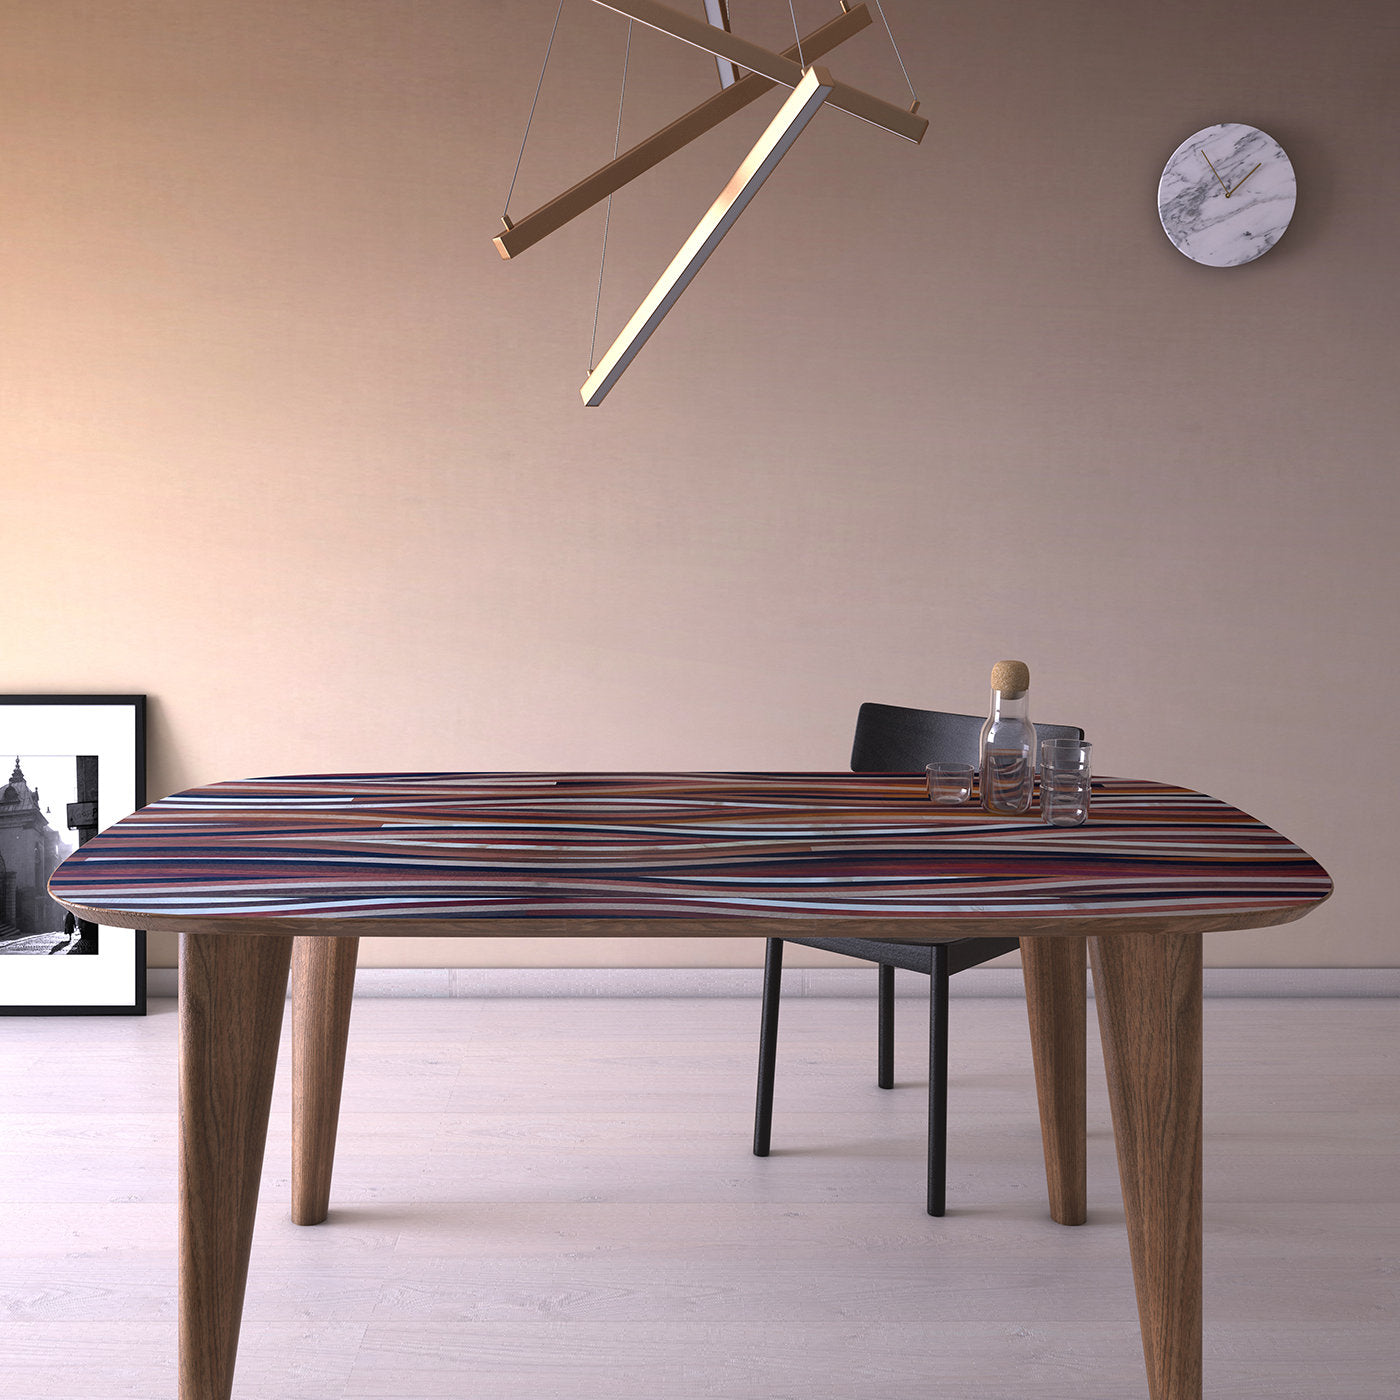 Multiessenza Dining Table by Gabriele E. M. D'Angelo - Alternative view 2